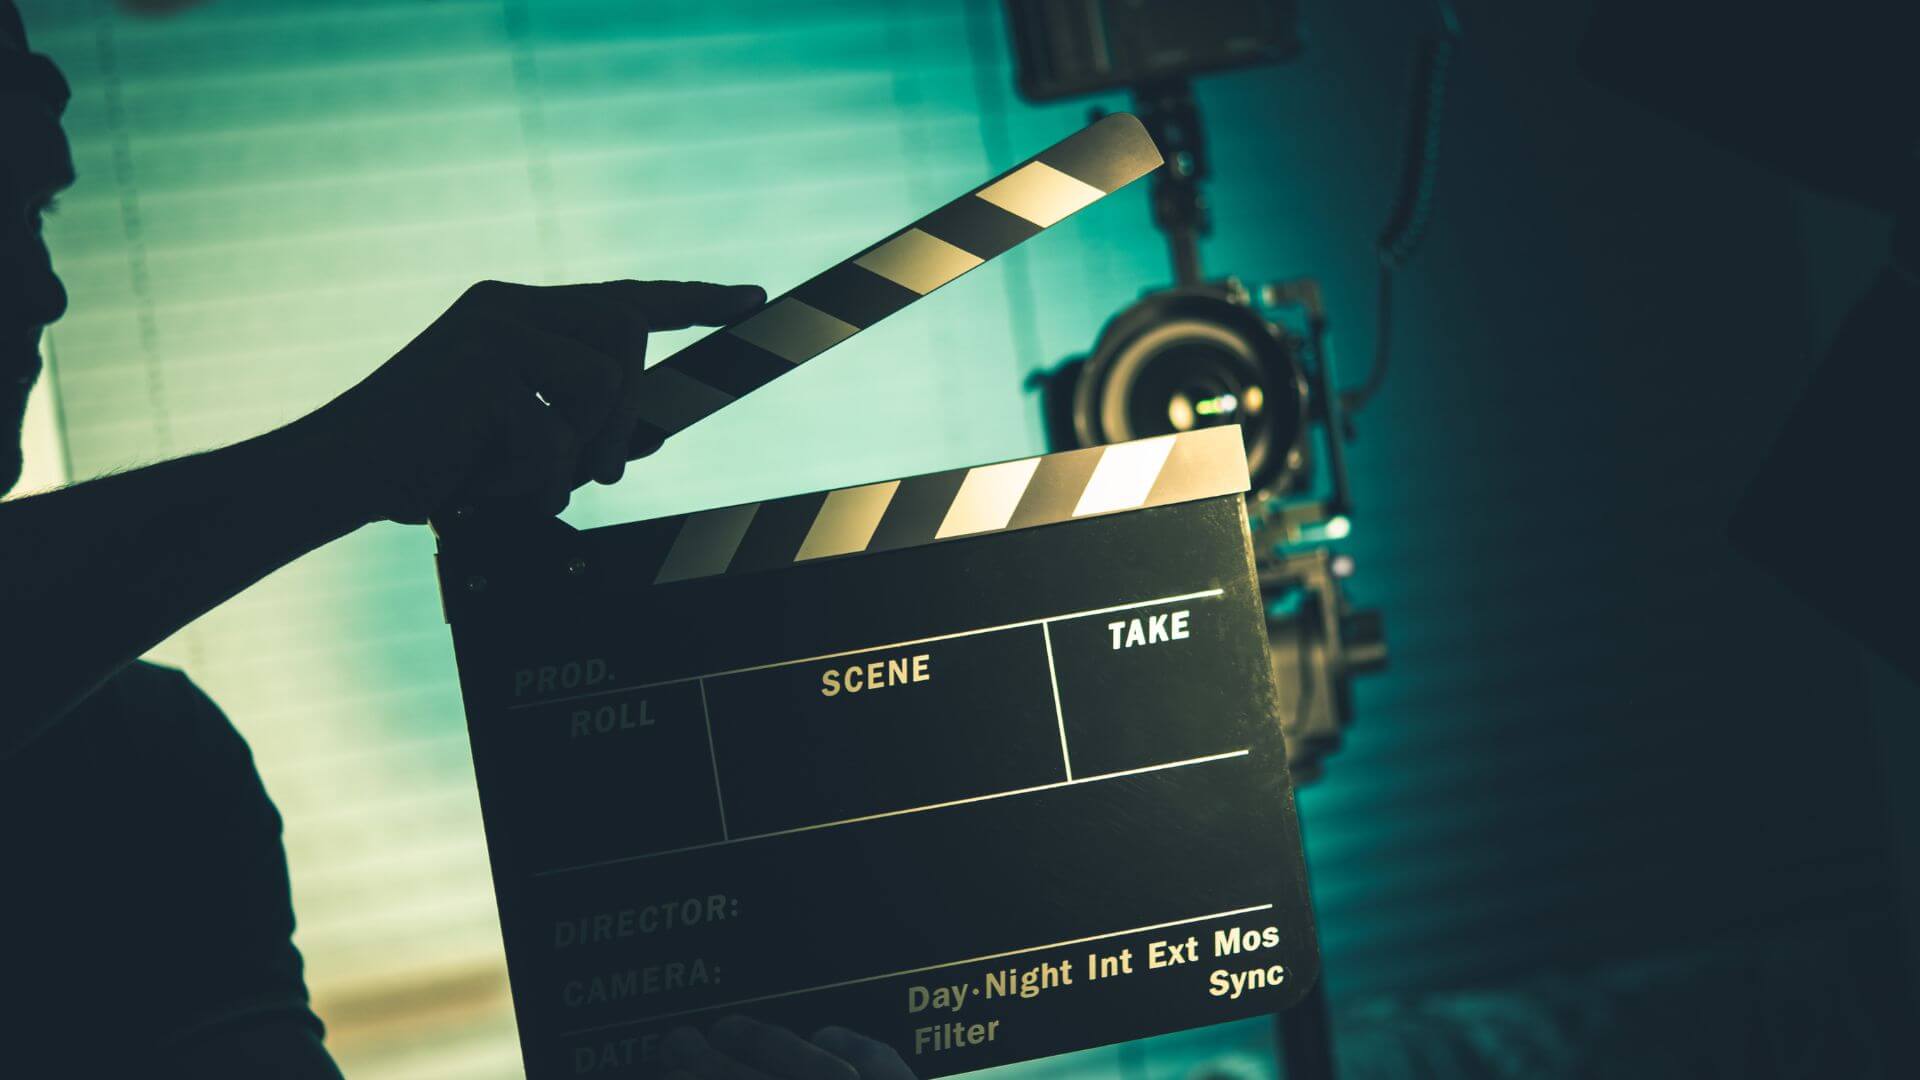 Everything You Need To Know Before Starting Your Video Project